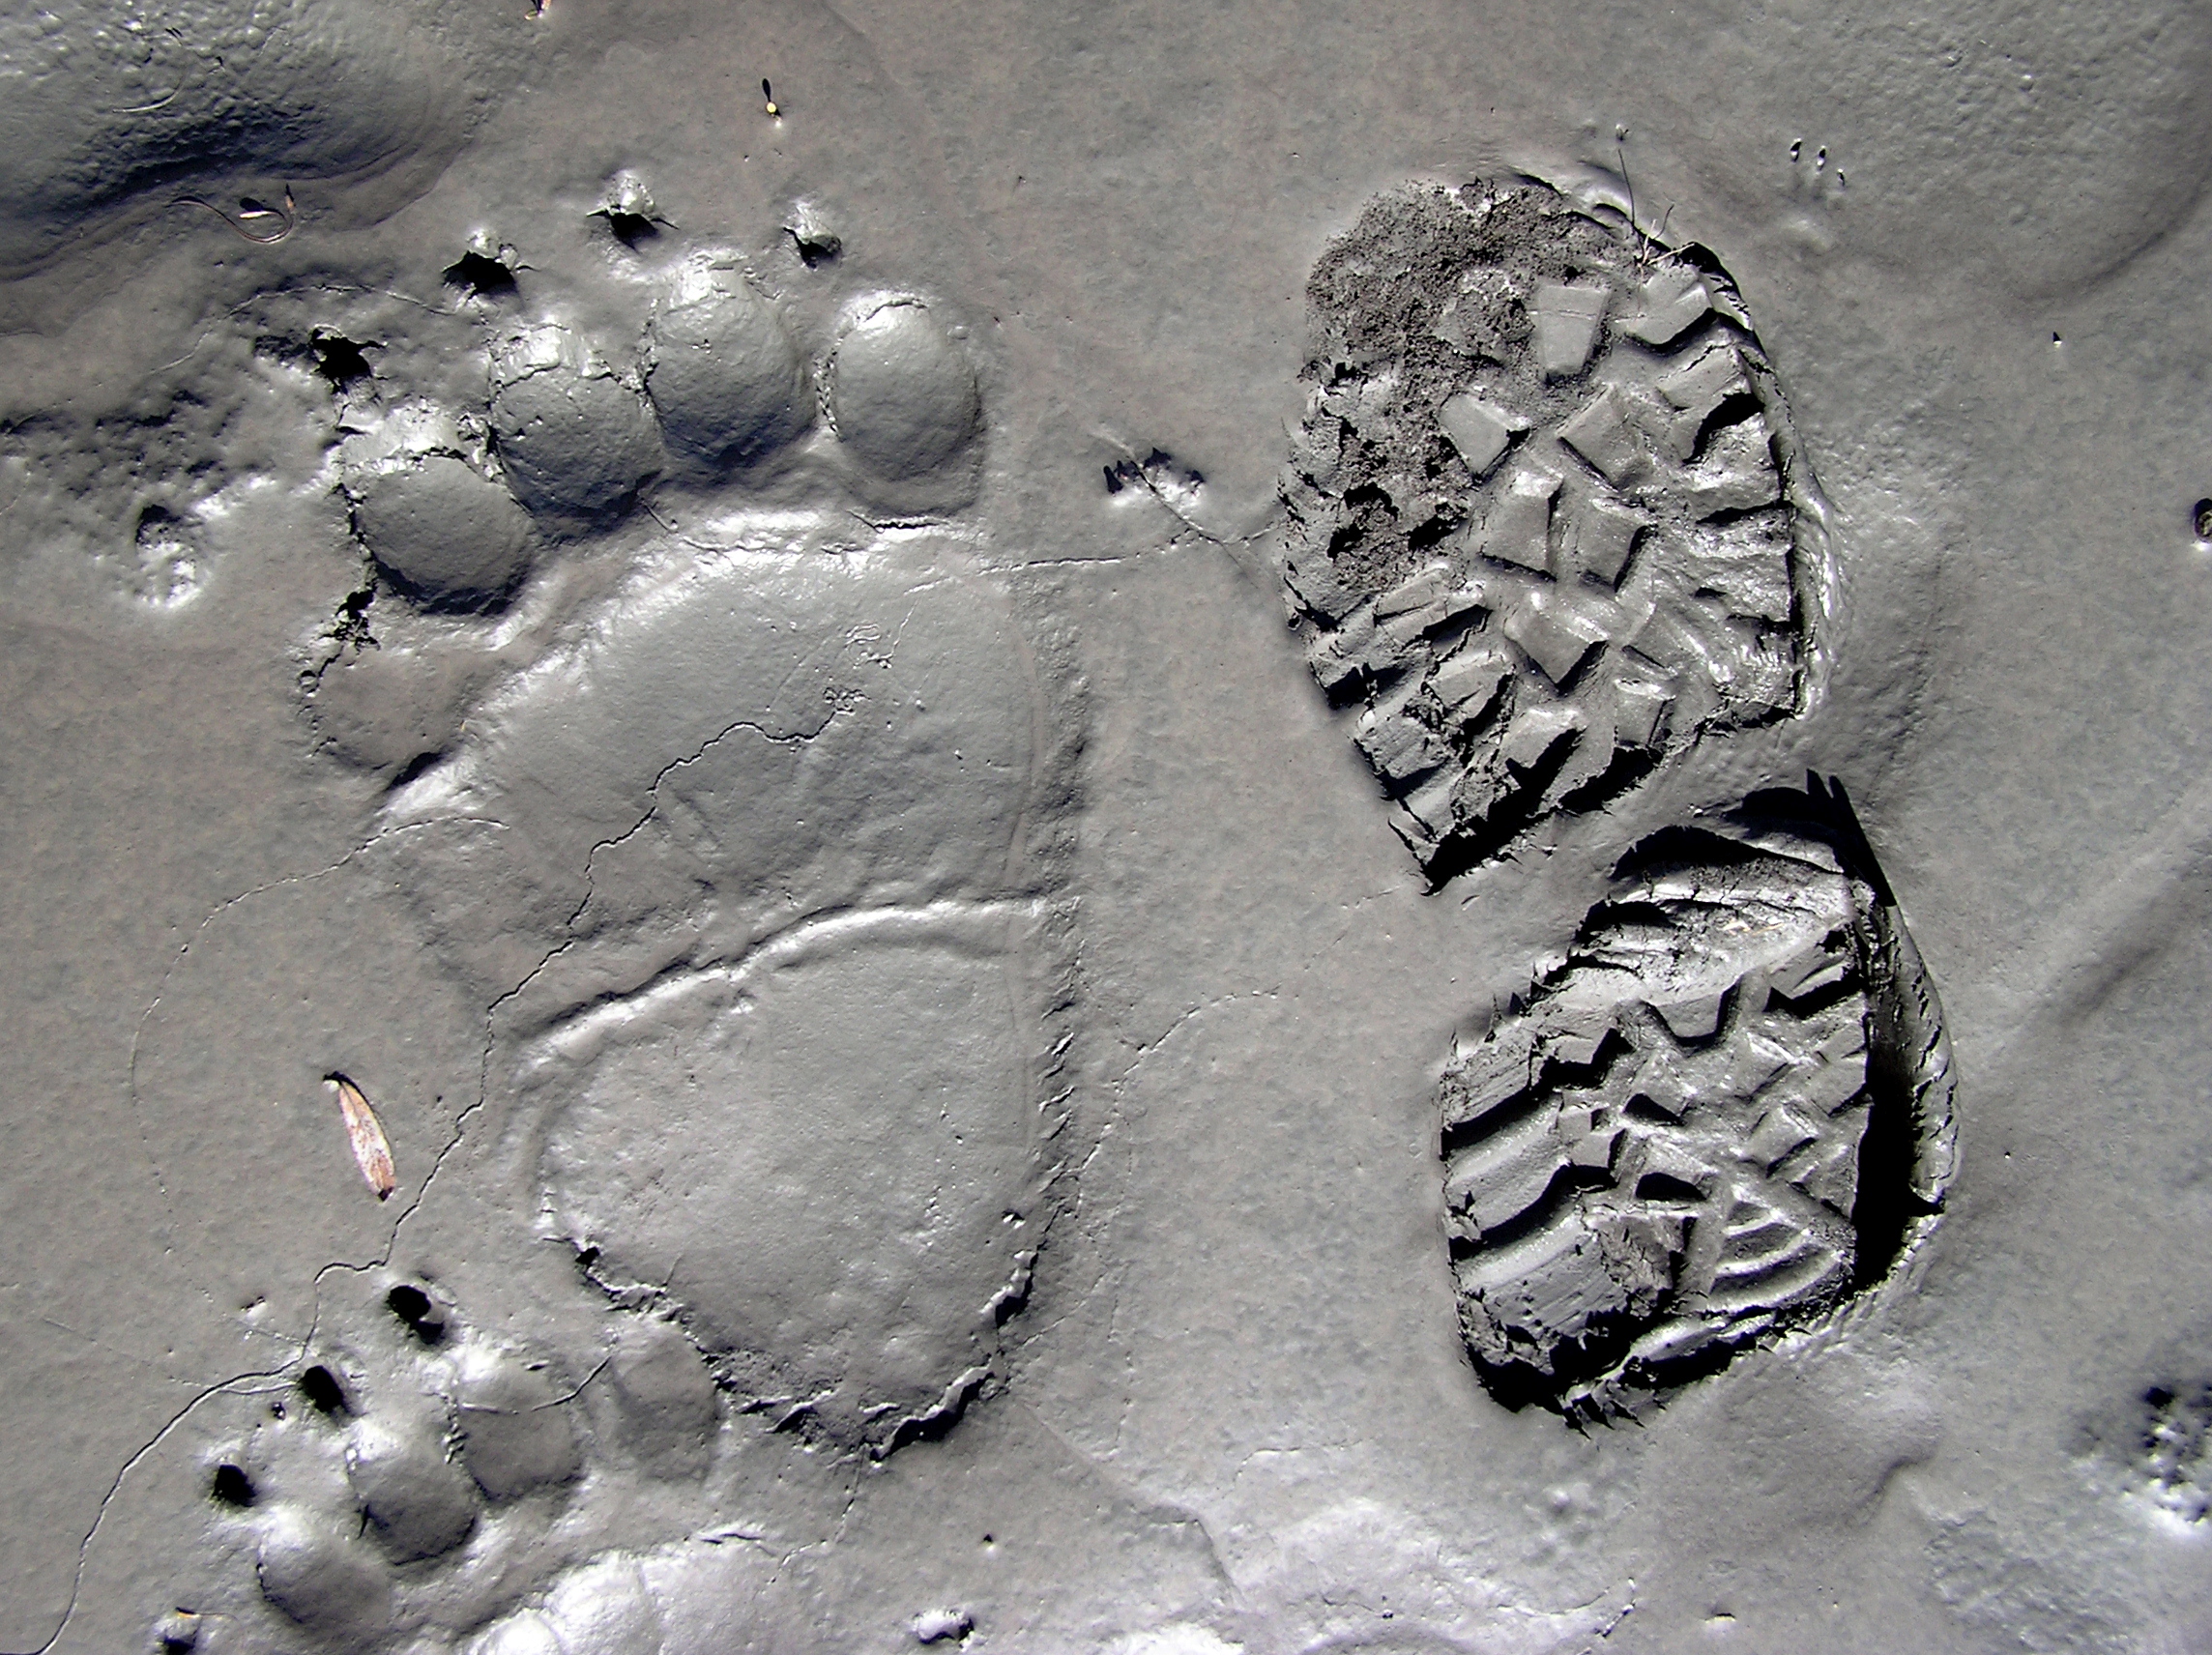 A grizzly bear's foot imprint sits next to Brian's hiking boot imprint in muddy clay near a Denali riverbed.